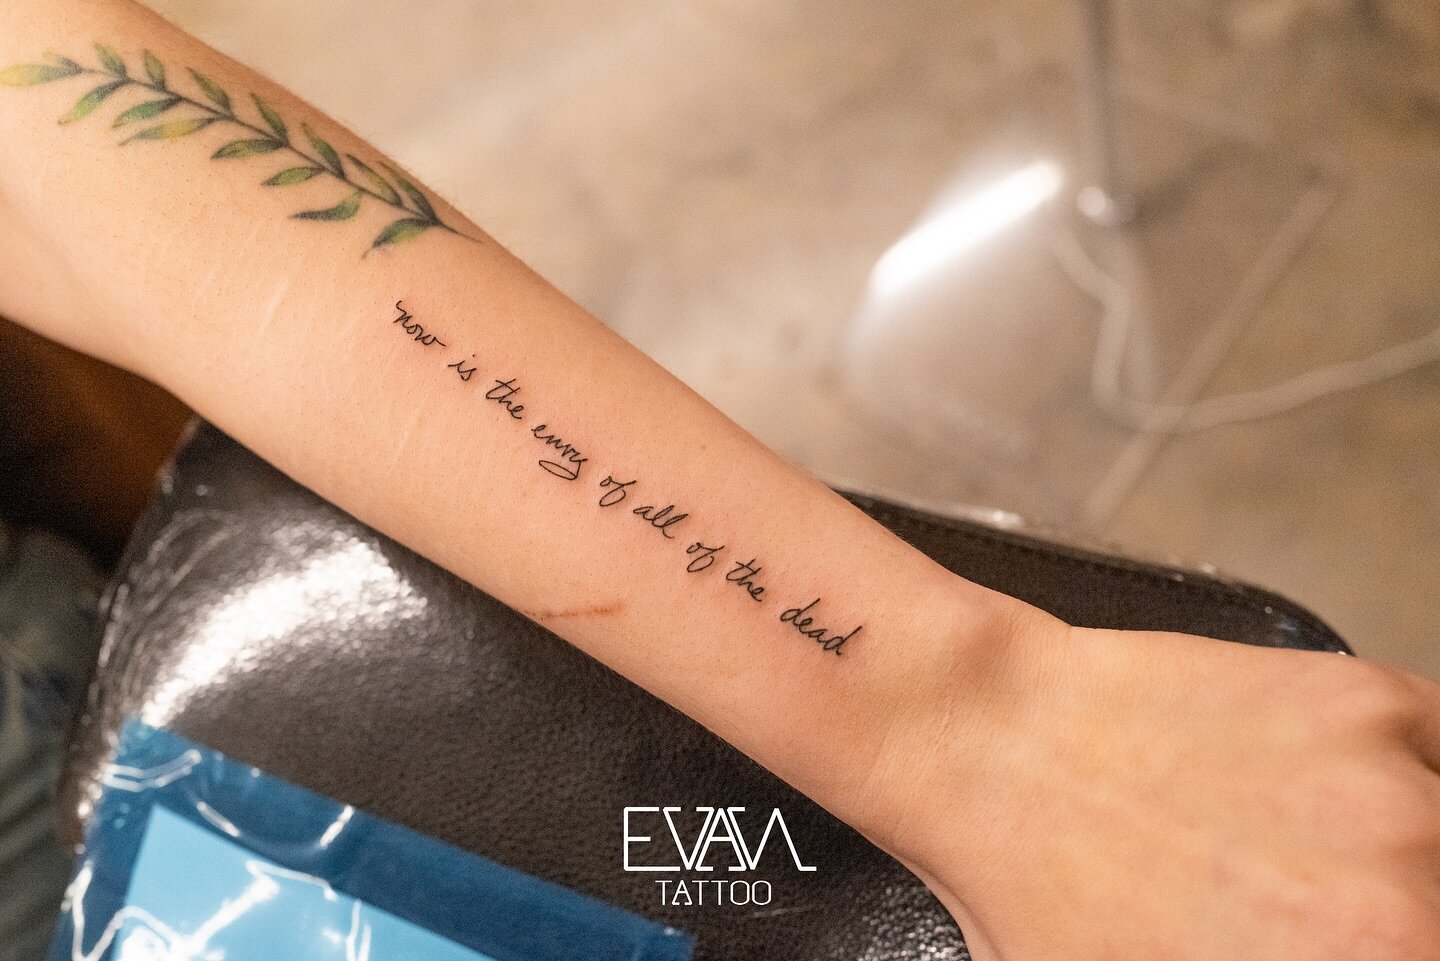 &ldquo;Now is the envy of all of the dead&rdquo;
Thanks Jean.

#mother #handwriting 
#tattoo #evantattoo